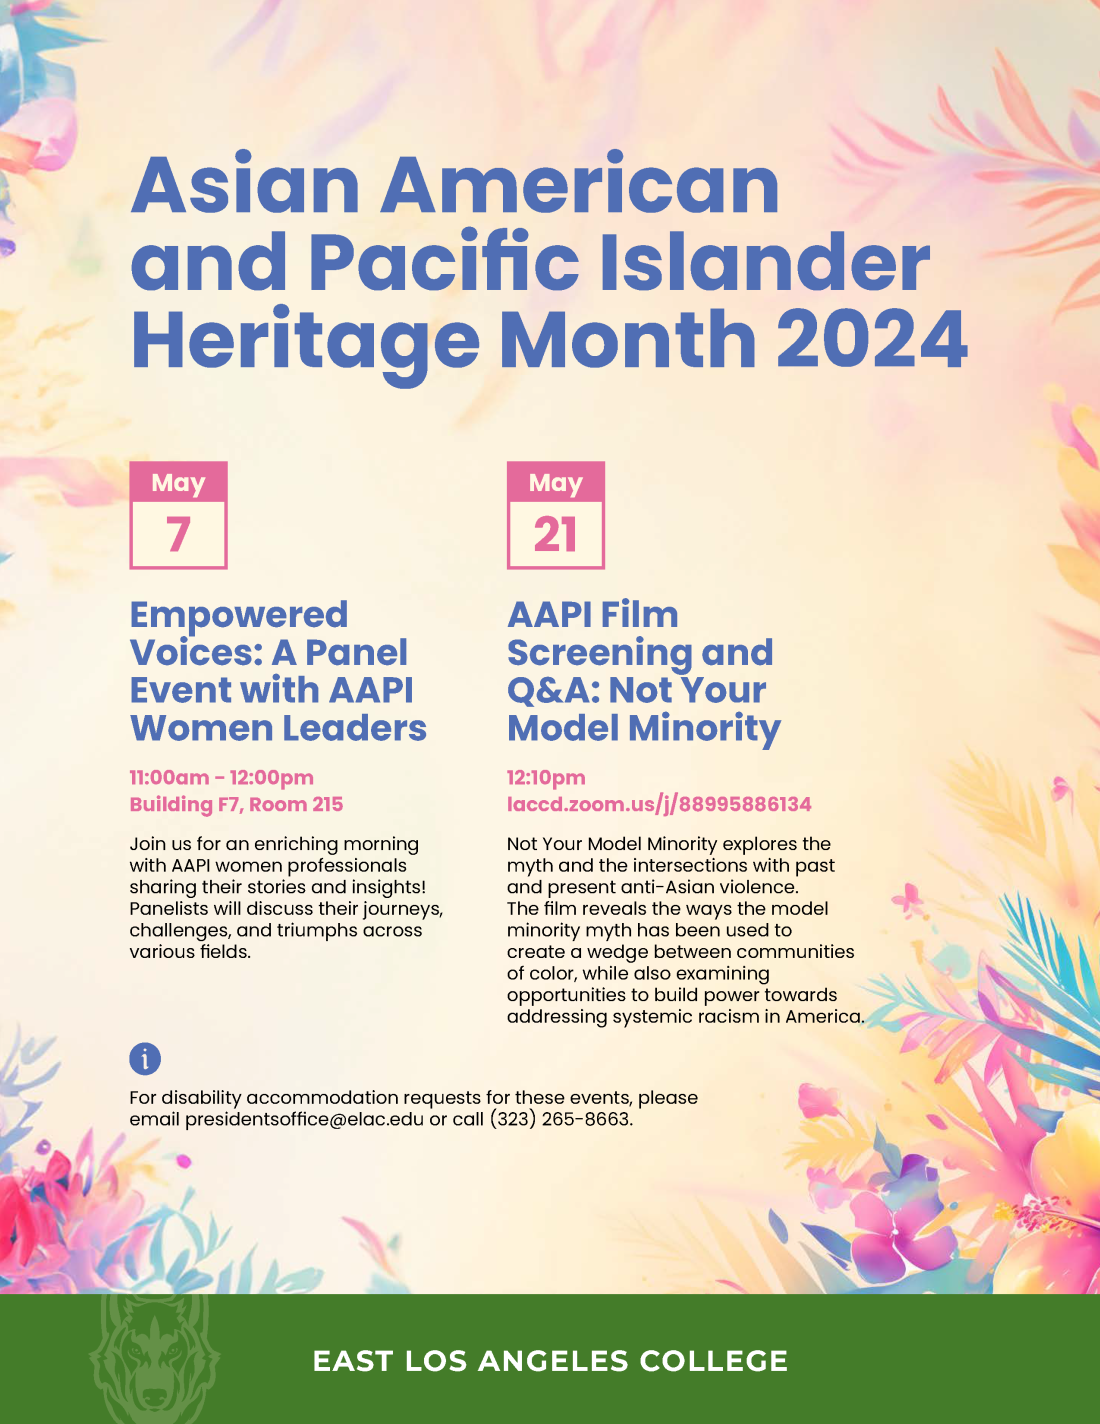 ELAC AAPI Heritage Month Events May 2024